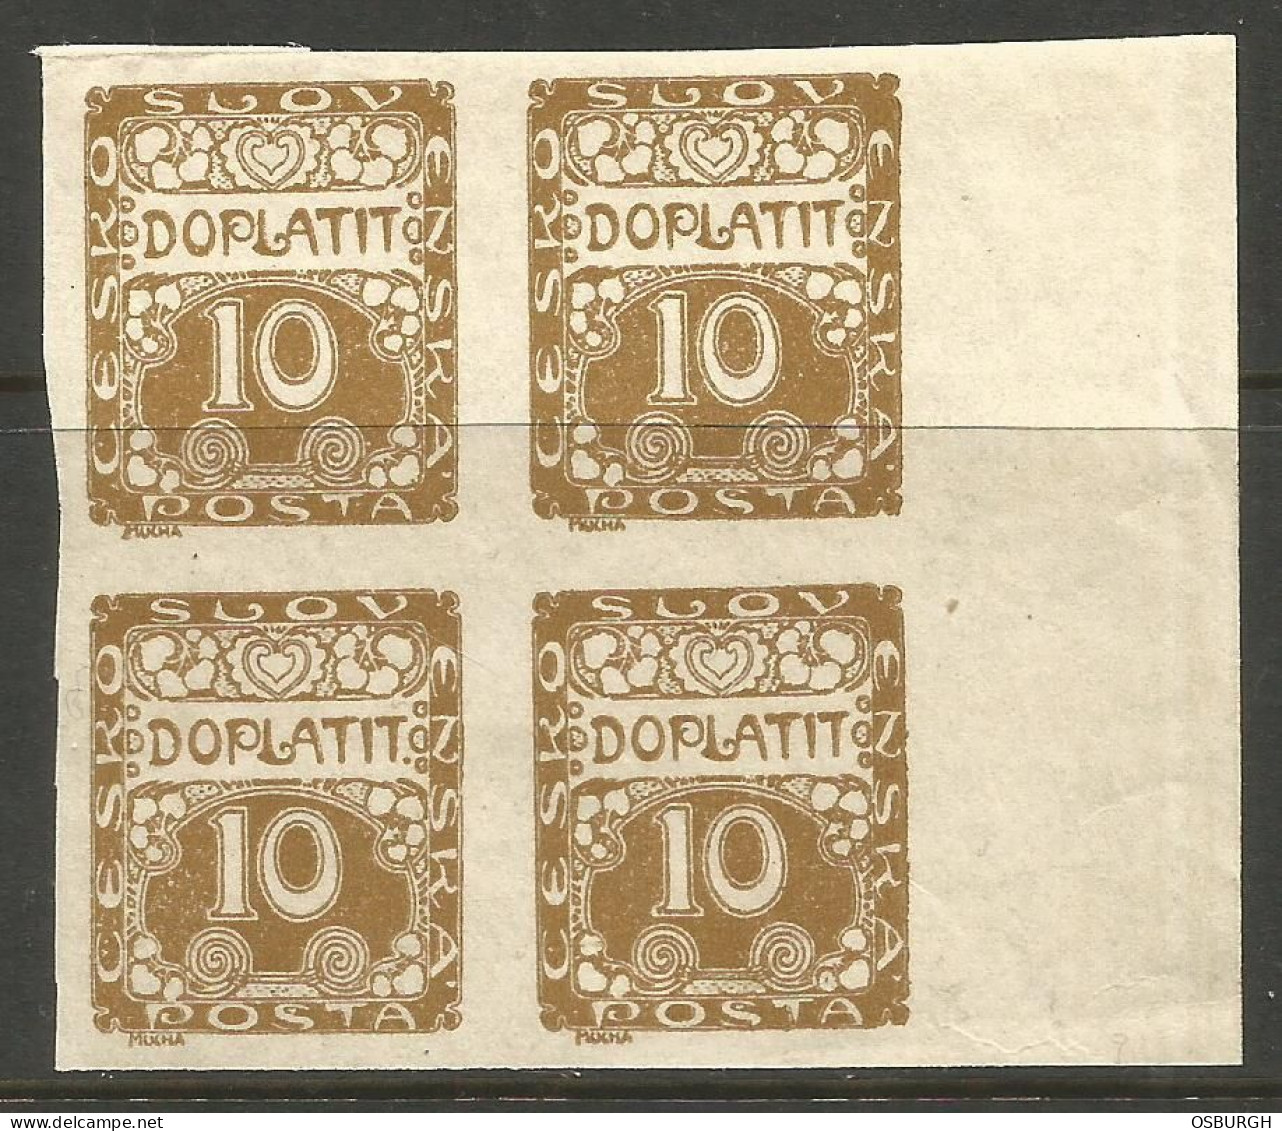 CZECHOSLOVAKIA. 10h IMPERF POSTAGE DUE MARGINAL BLOCK OF FOUR. MOUNTED MINT. - Segnatasse